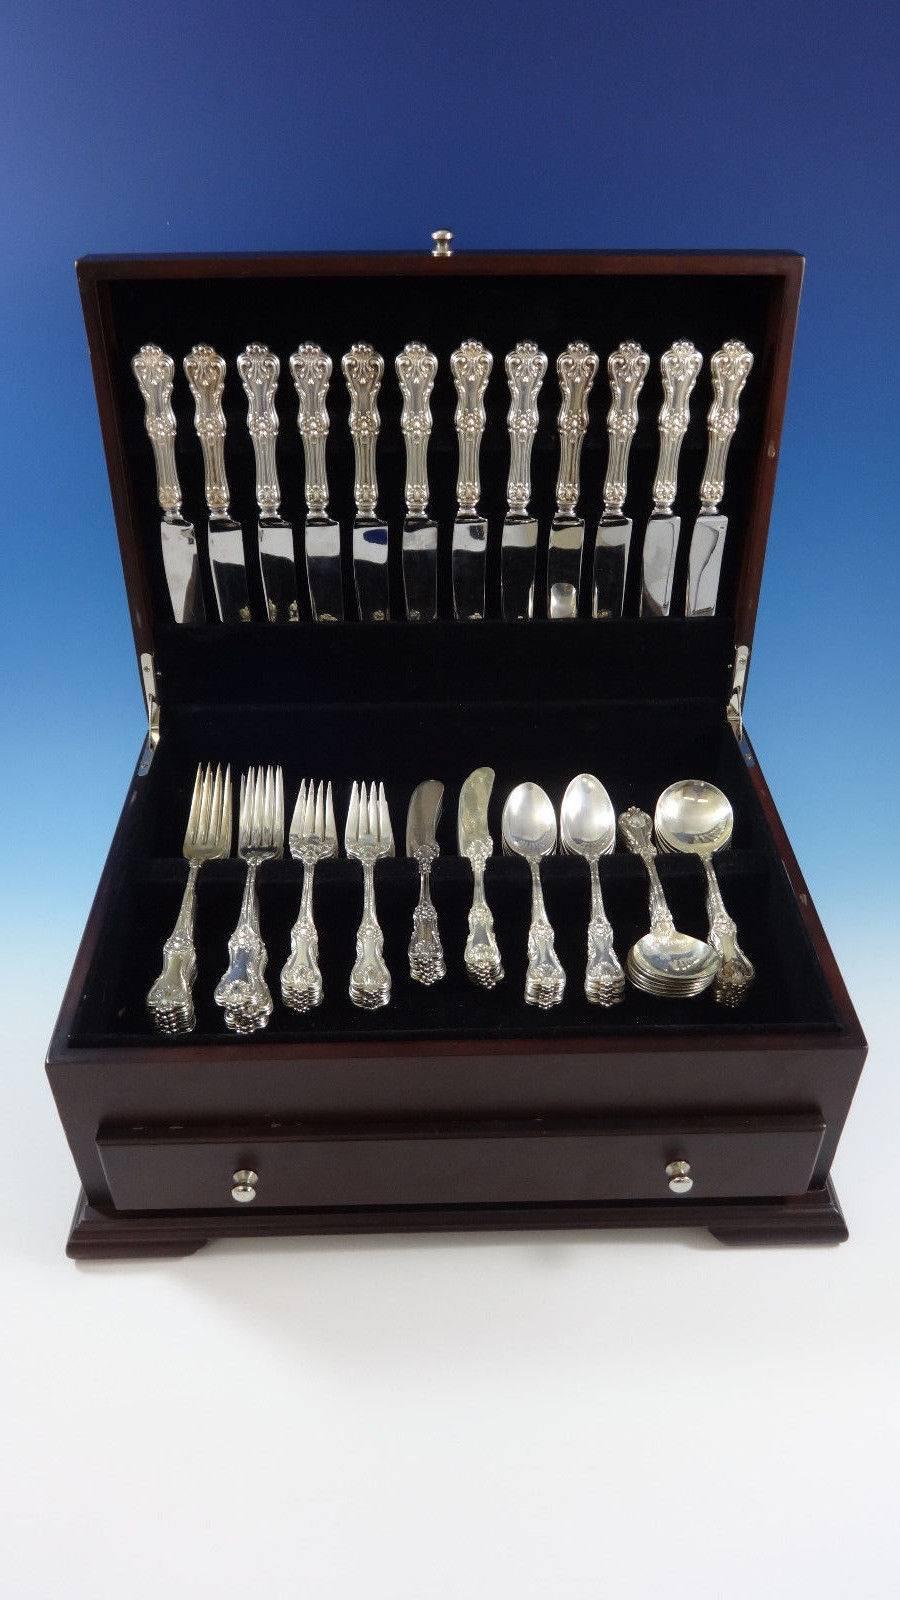 Federal Cotillion by Frank Smith sterling silver flatware set - 72 Pieces. This set includes: 

12 knives 8 3/4